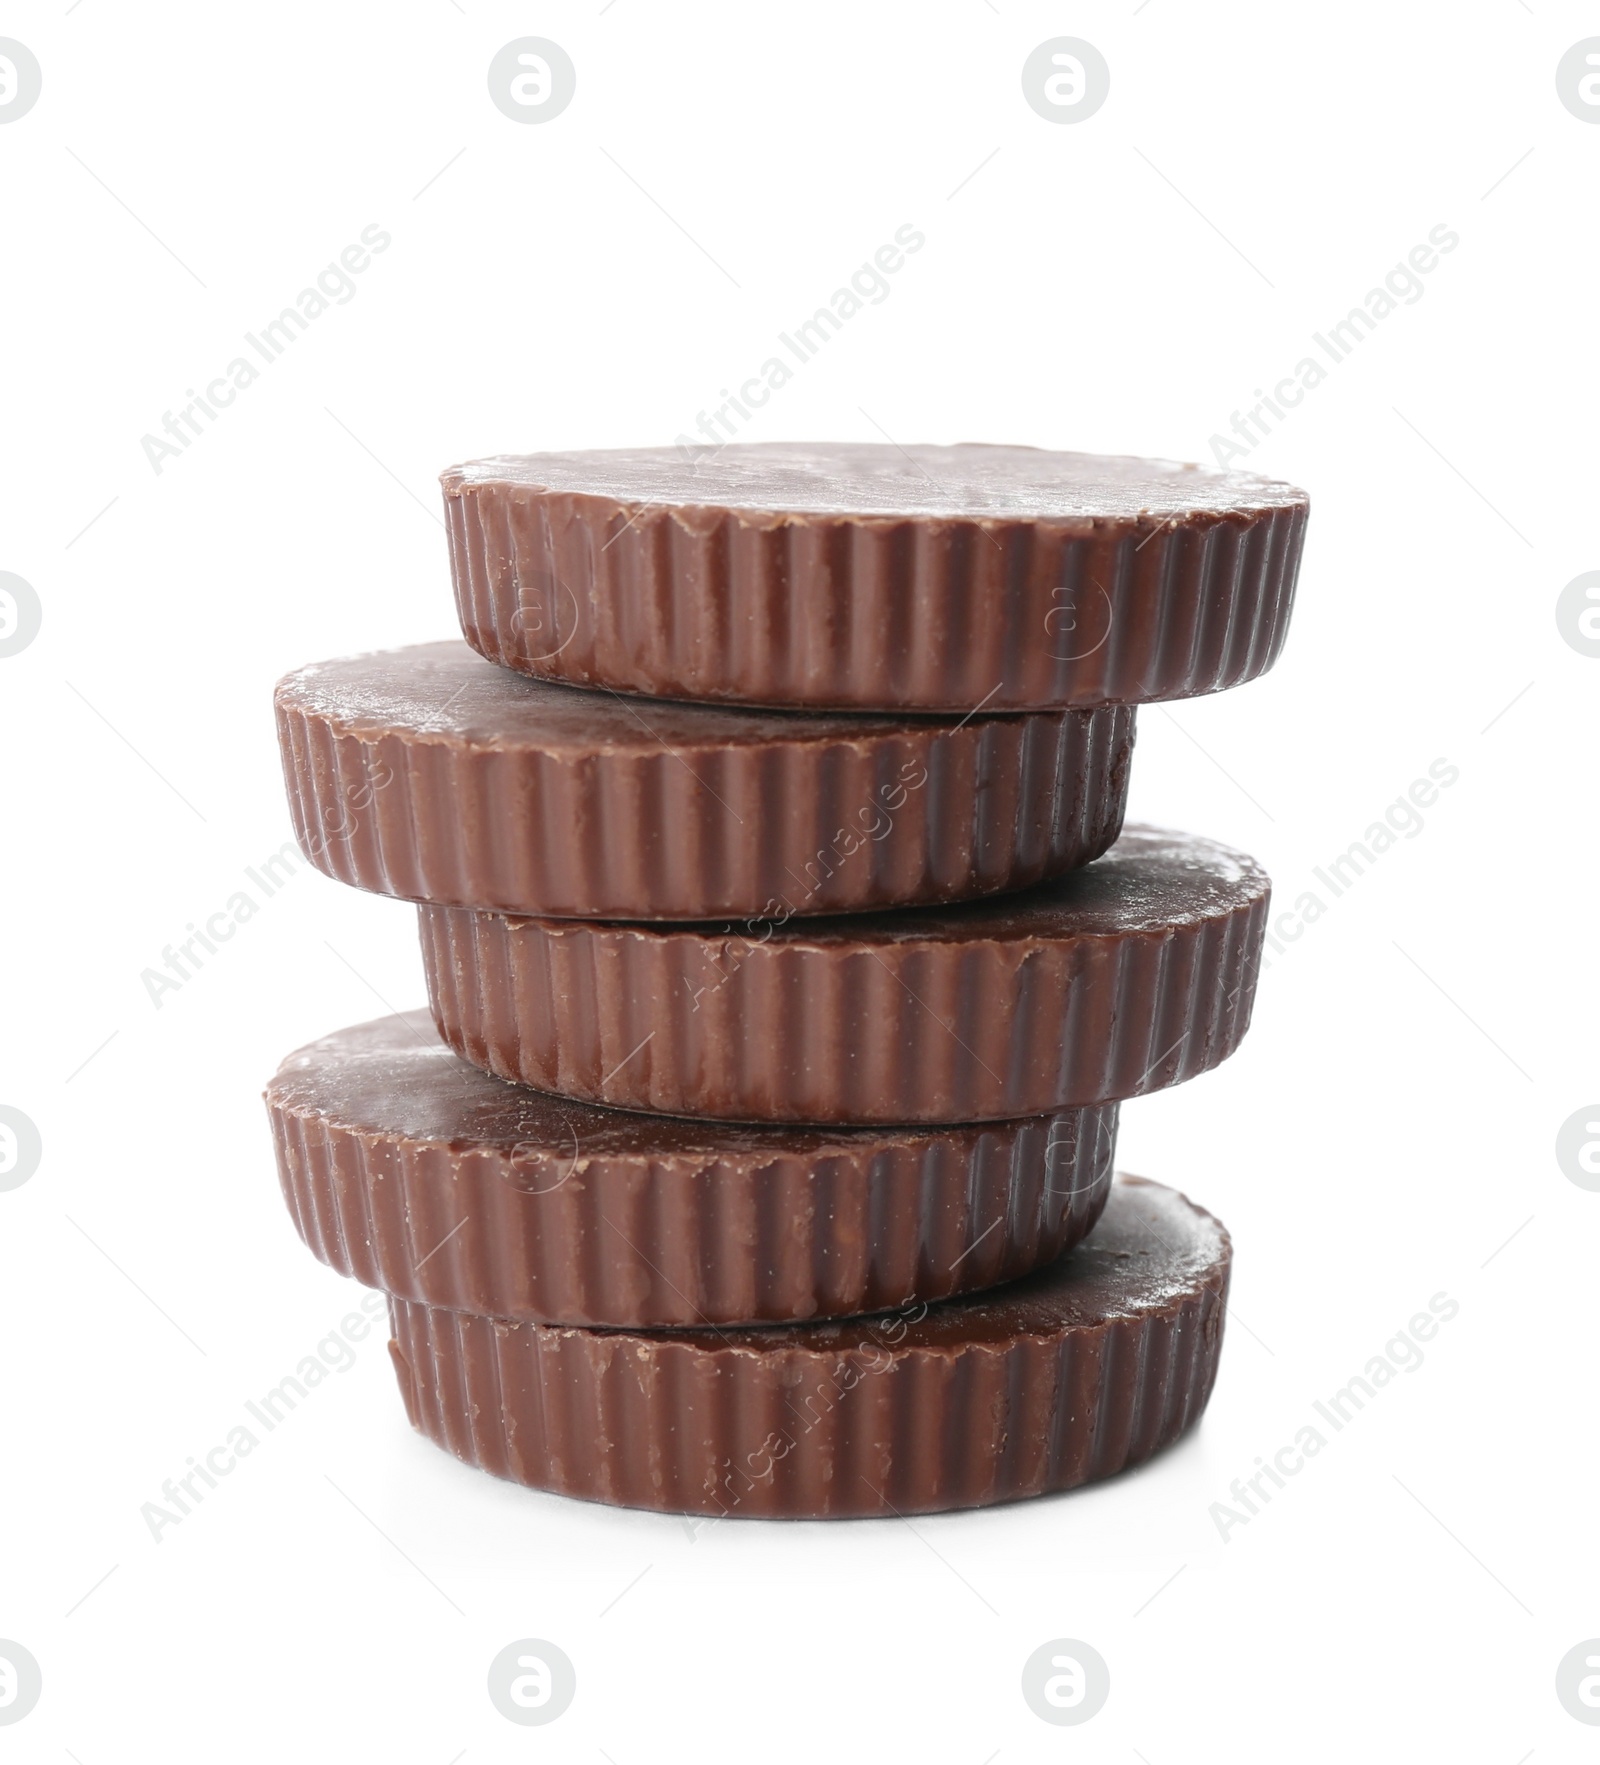 Photo of Delicious peanut butter cups on white background